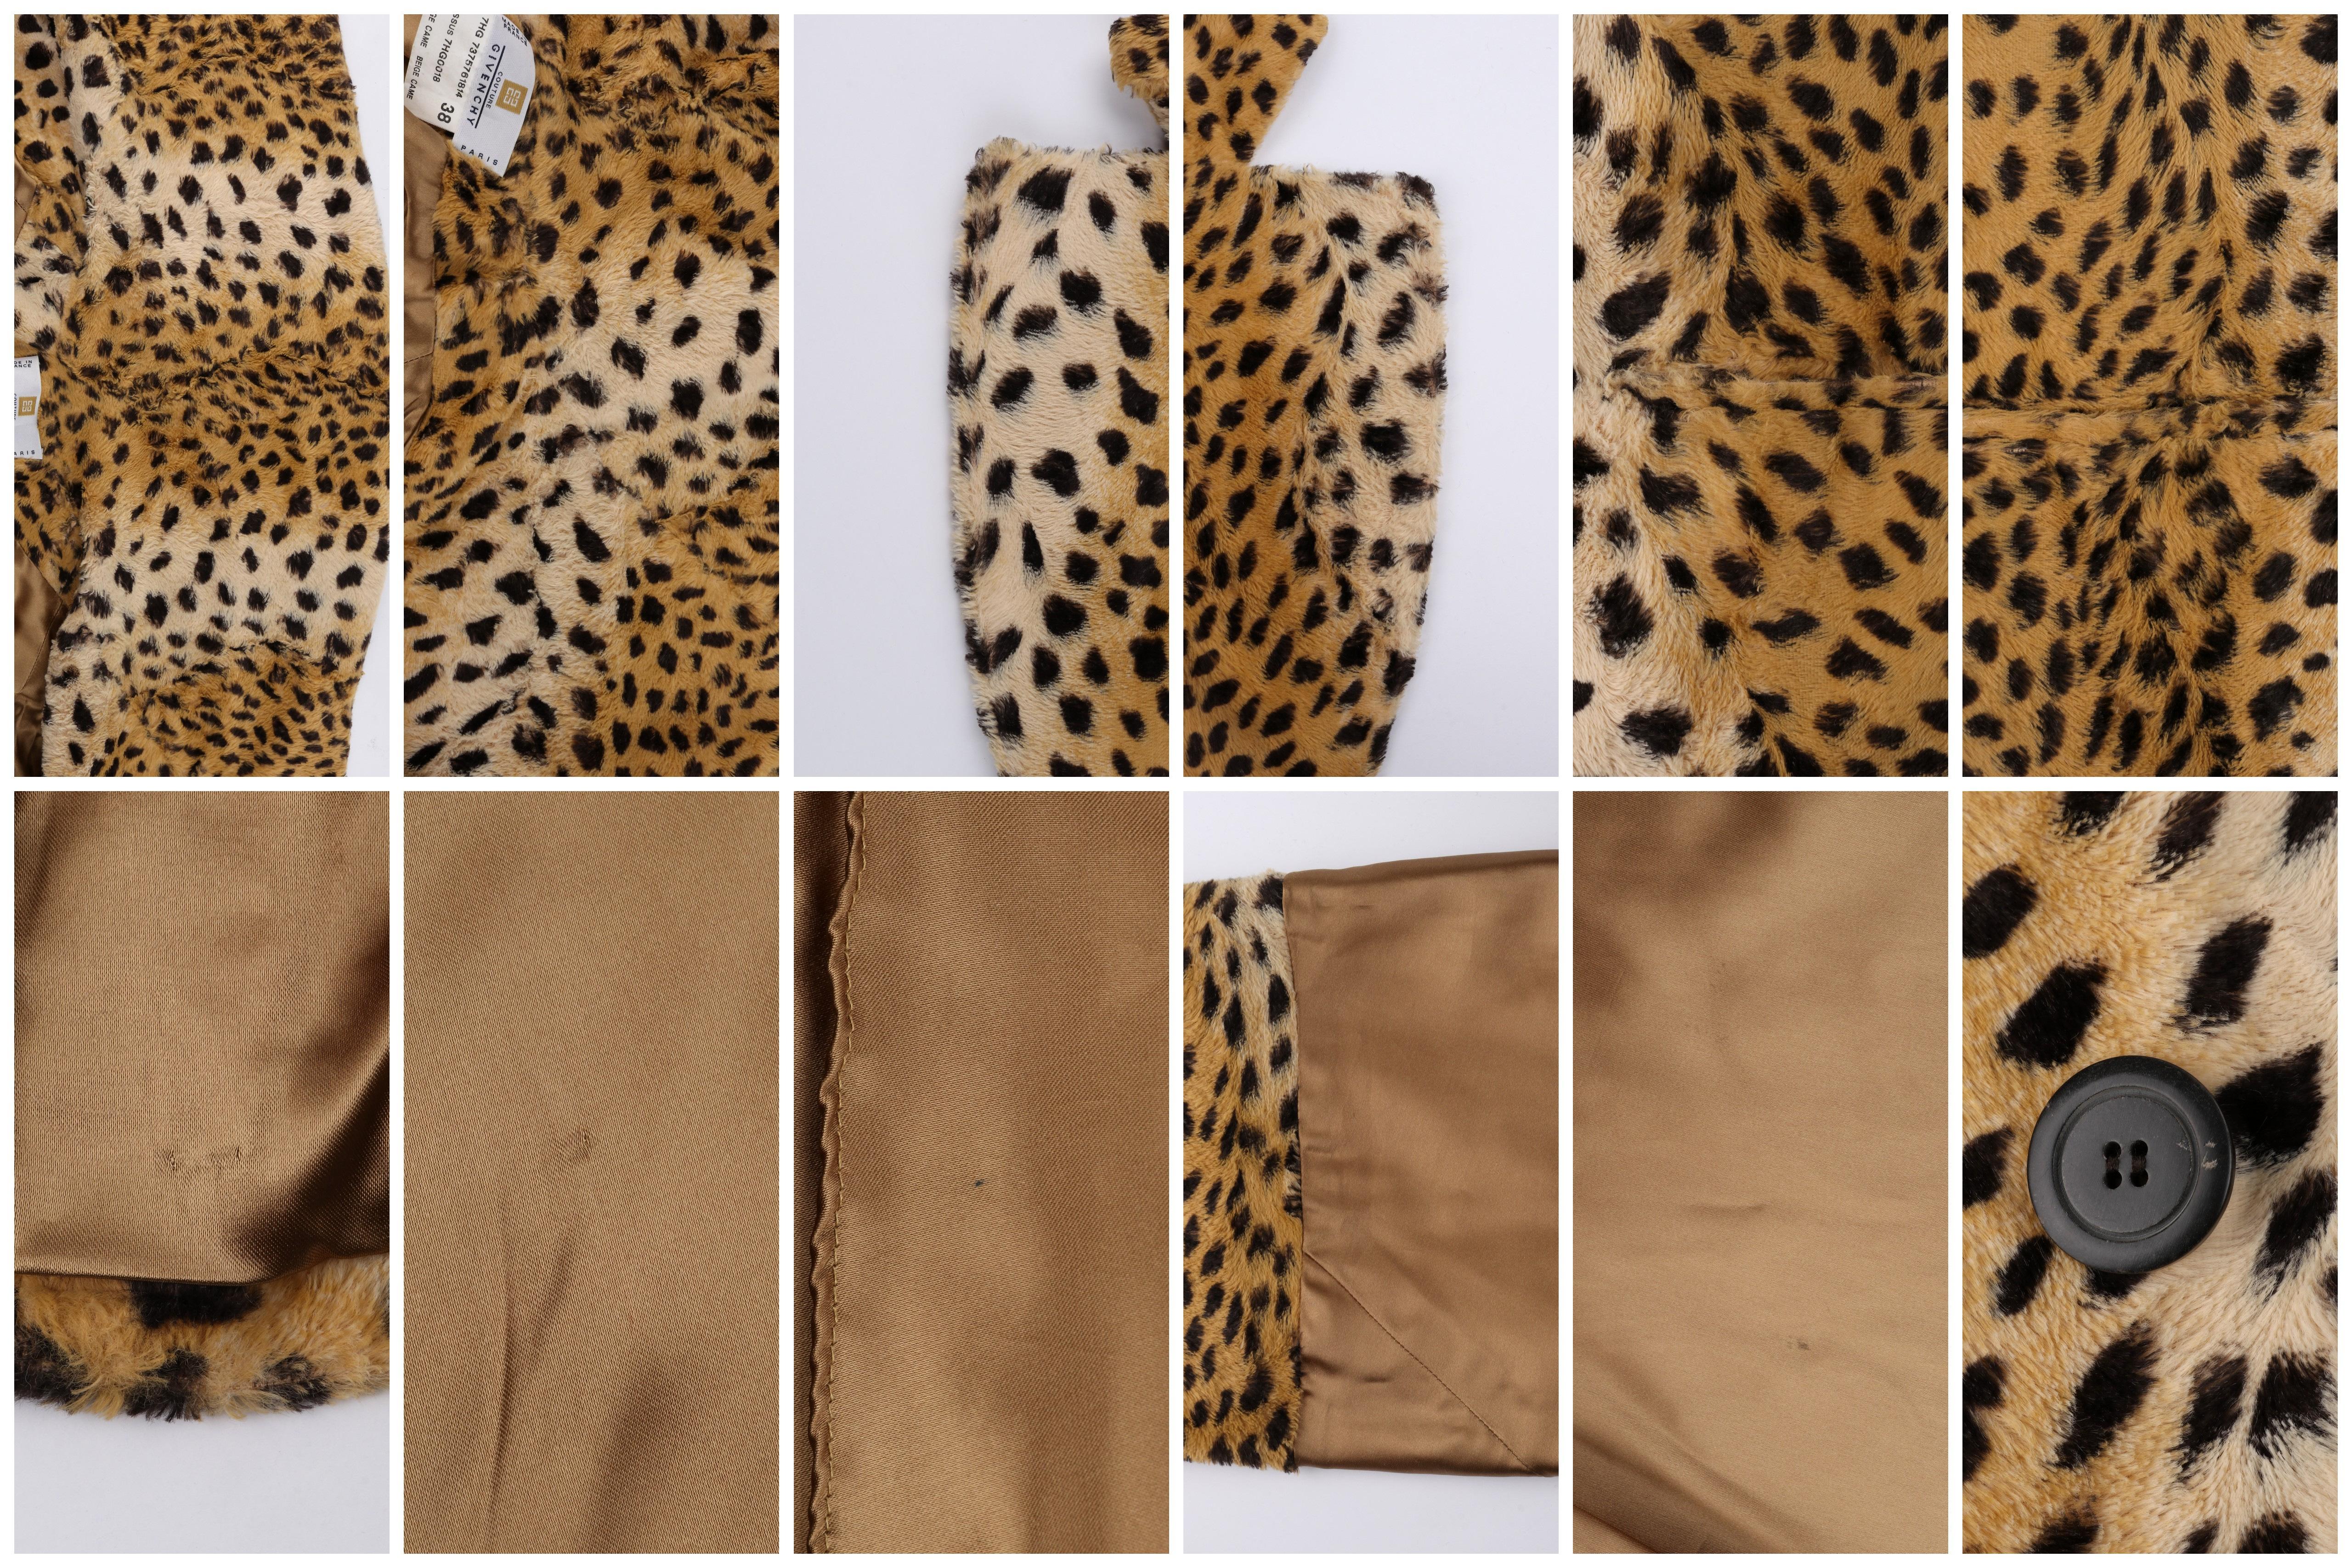 GIVENCHY COUTURE A/W 1997 ALEXANDER McQUEEN Cheetah Print Faux Fur Paneled Coat For Sale 1